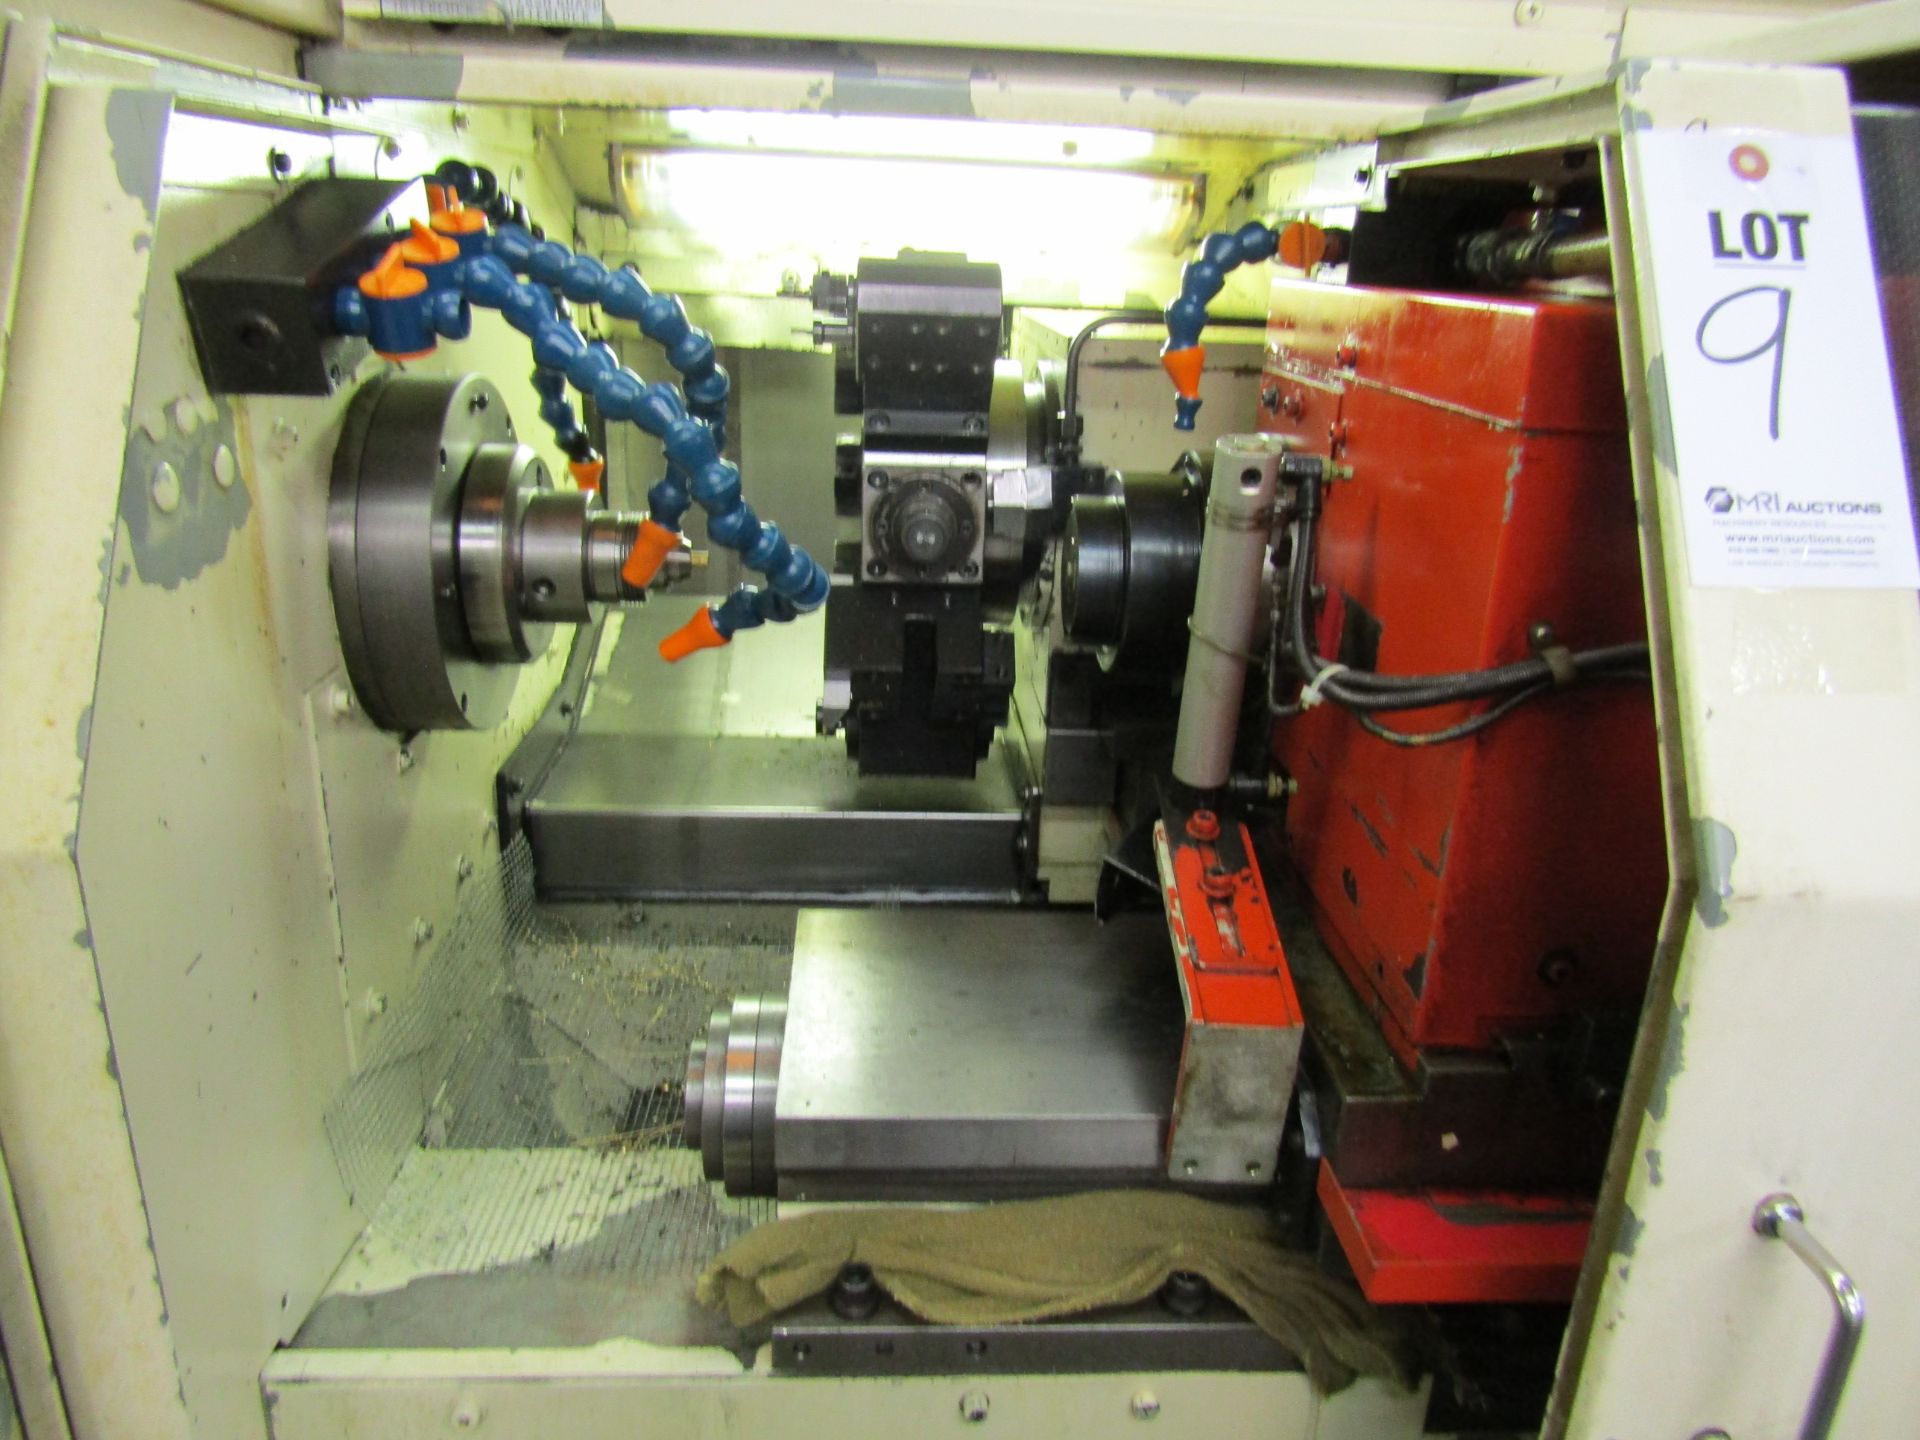 MIYANO BNC-34S CNC TURNING CENTER, SUB SPINDLE 4" CHUCK, 10 TOOL ATC, WITH TOOLING, FANUC SERIES - Image 4 of 9